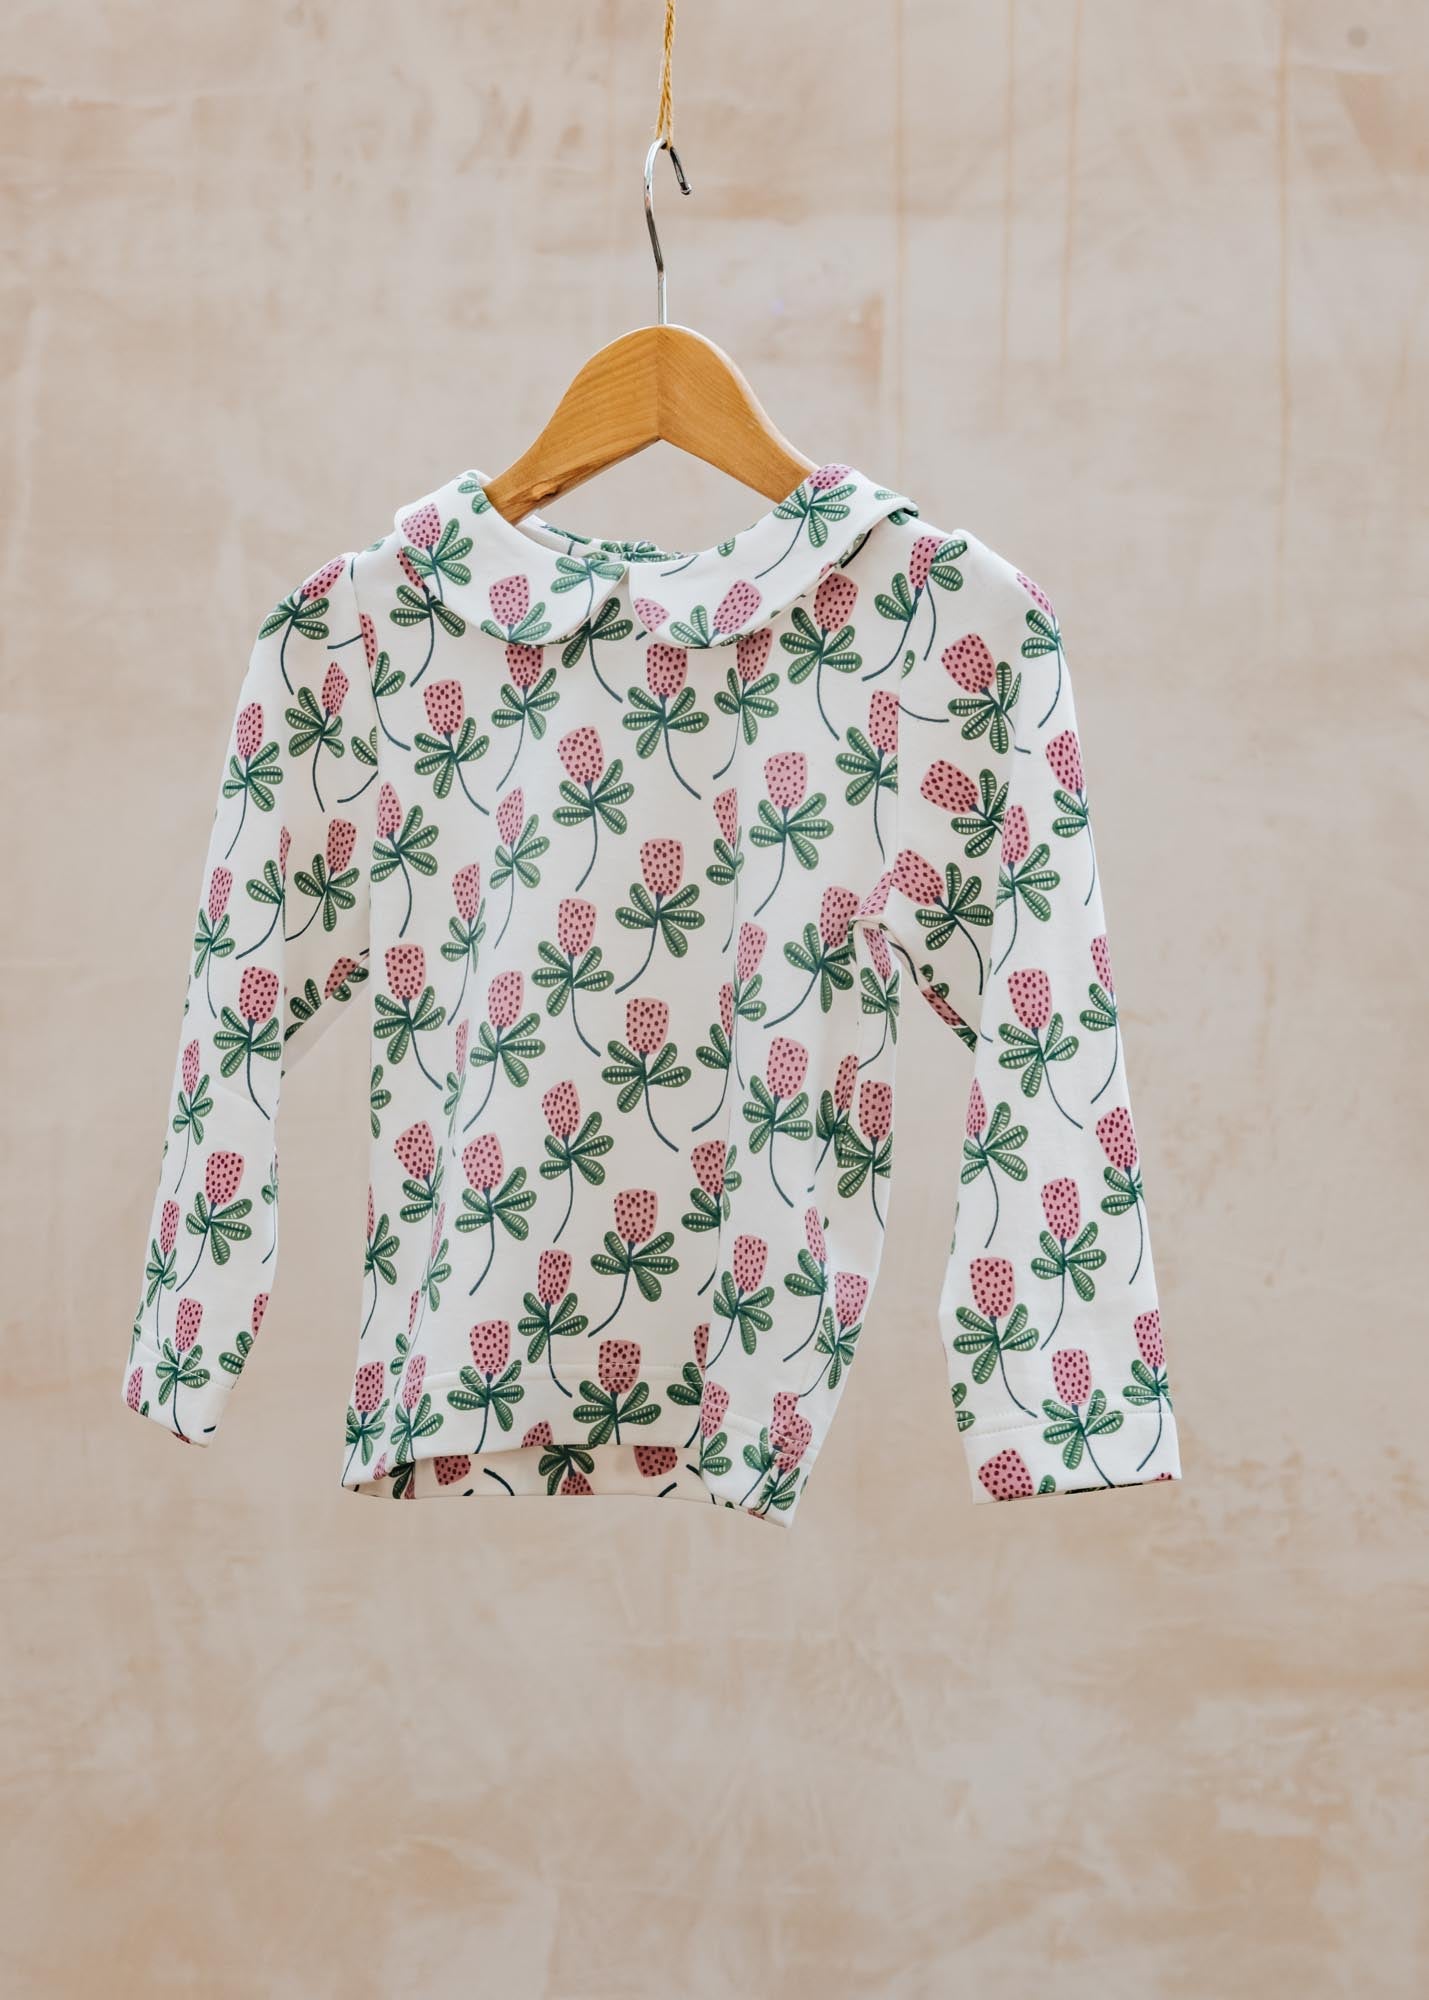 Pigeon Organics Children's Peter Pan Collar Blouse in Pink with Dotty Flowers